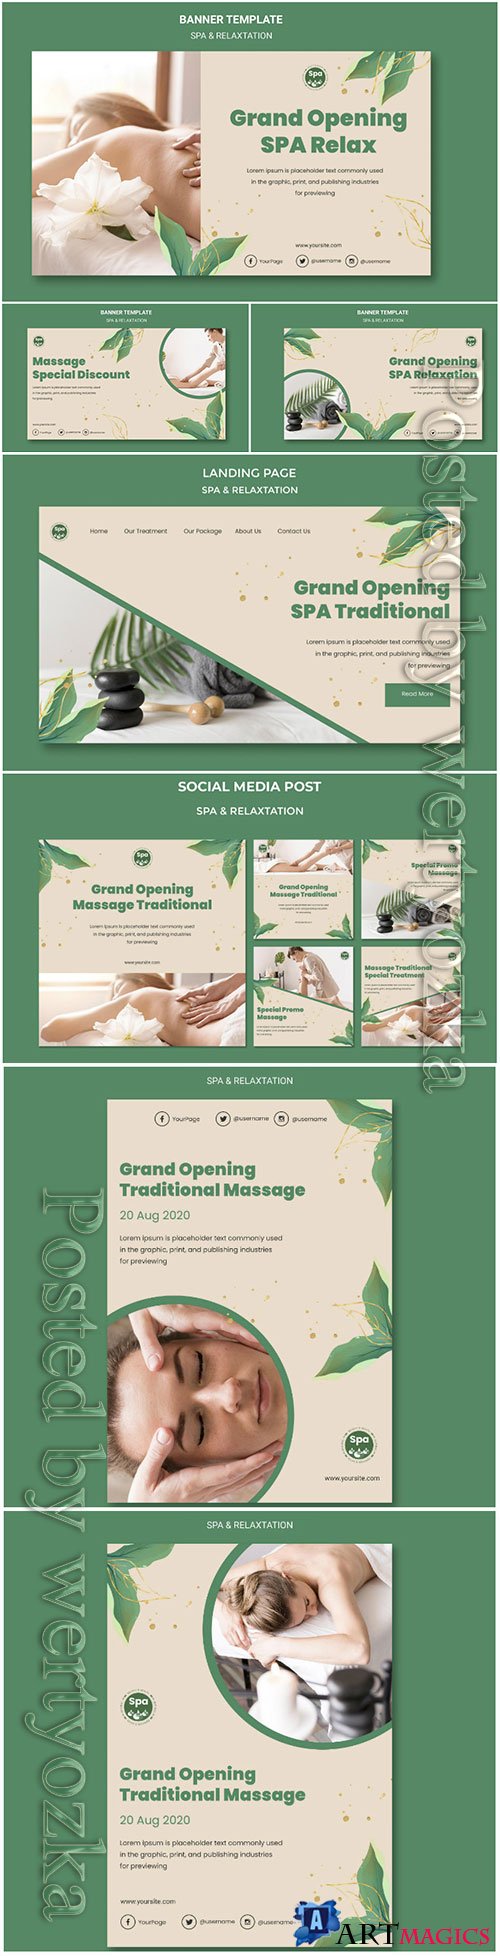 Spa concept banner template